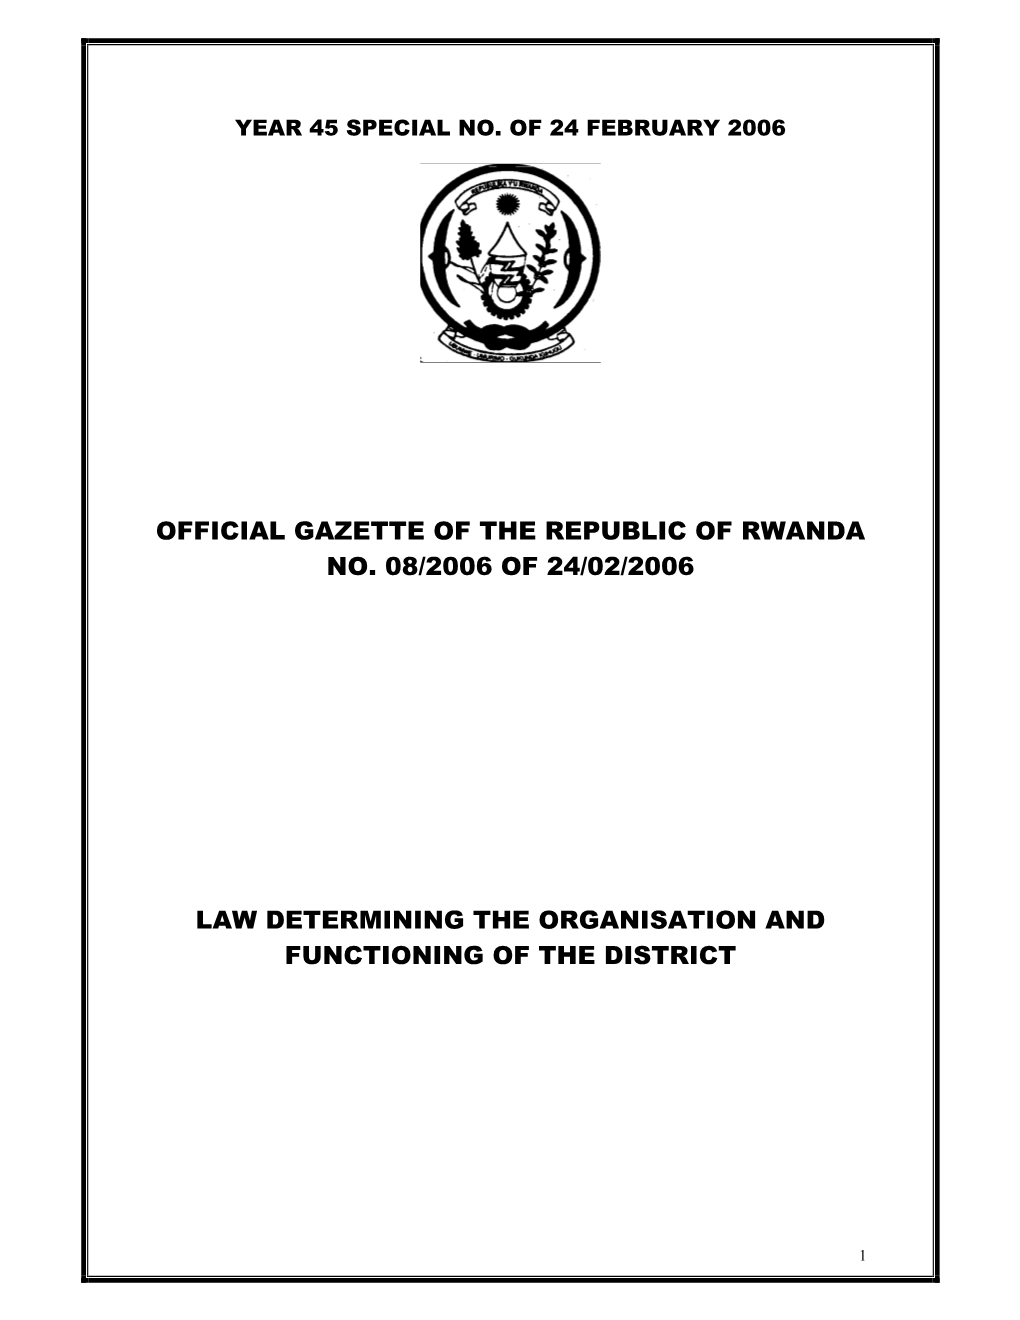 Law Determining the Organisation and Functioning of the District